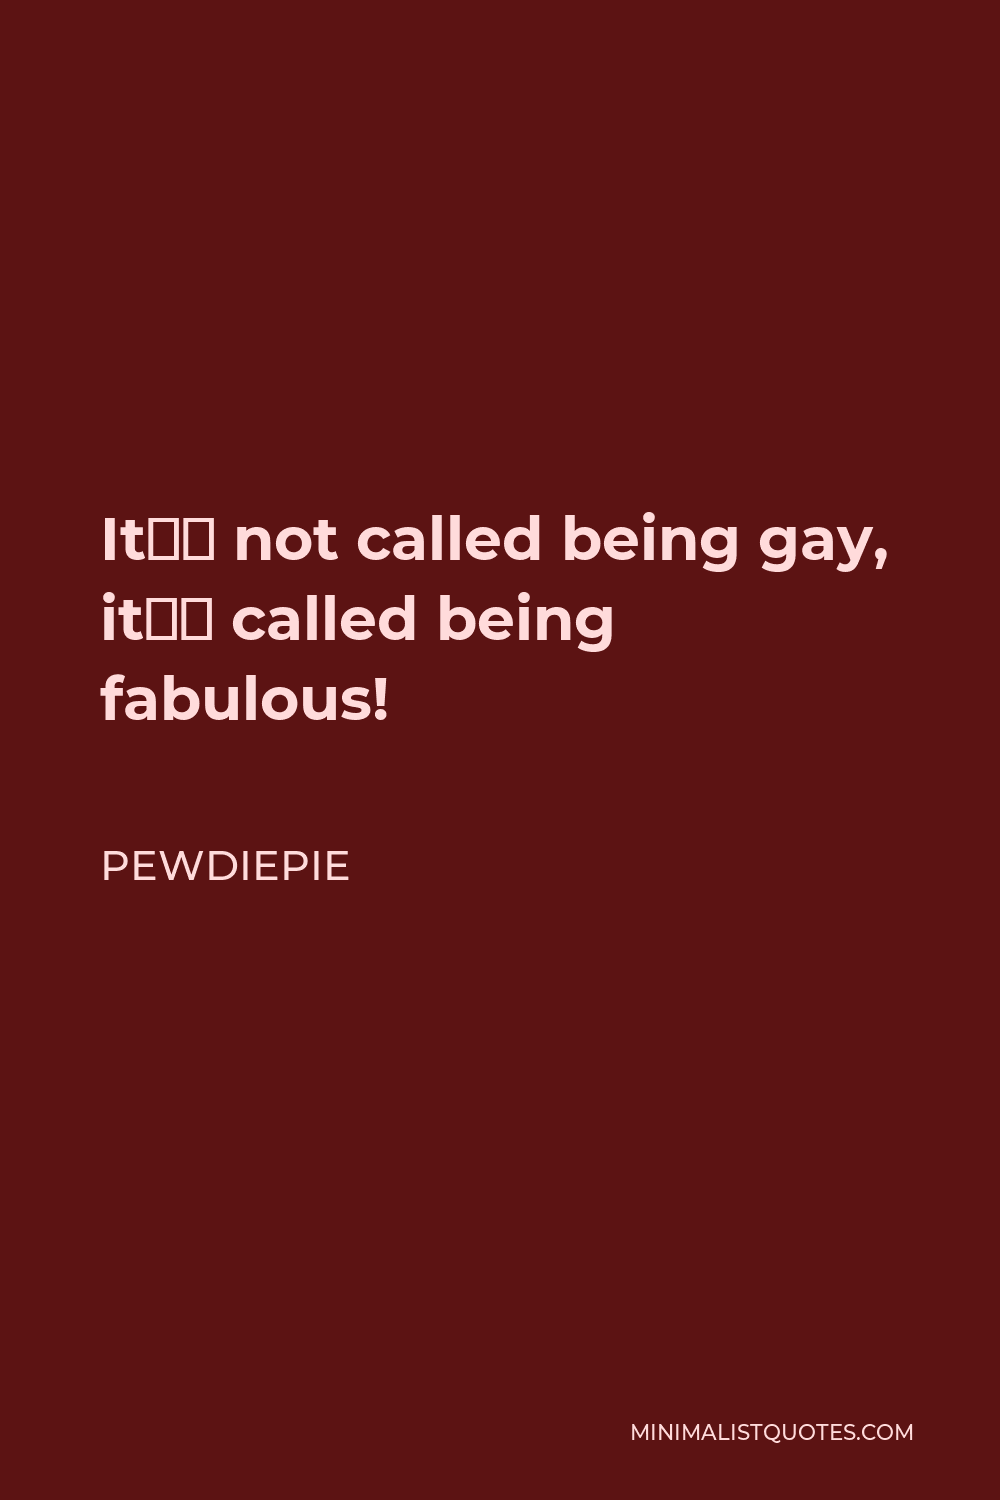 PewDiePie Quote - It’s not called being gay, it’s called being fabulous!